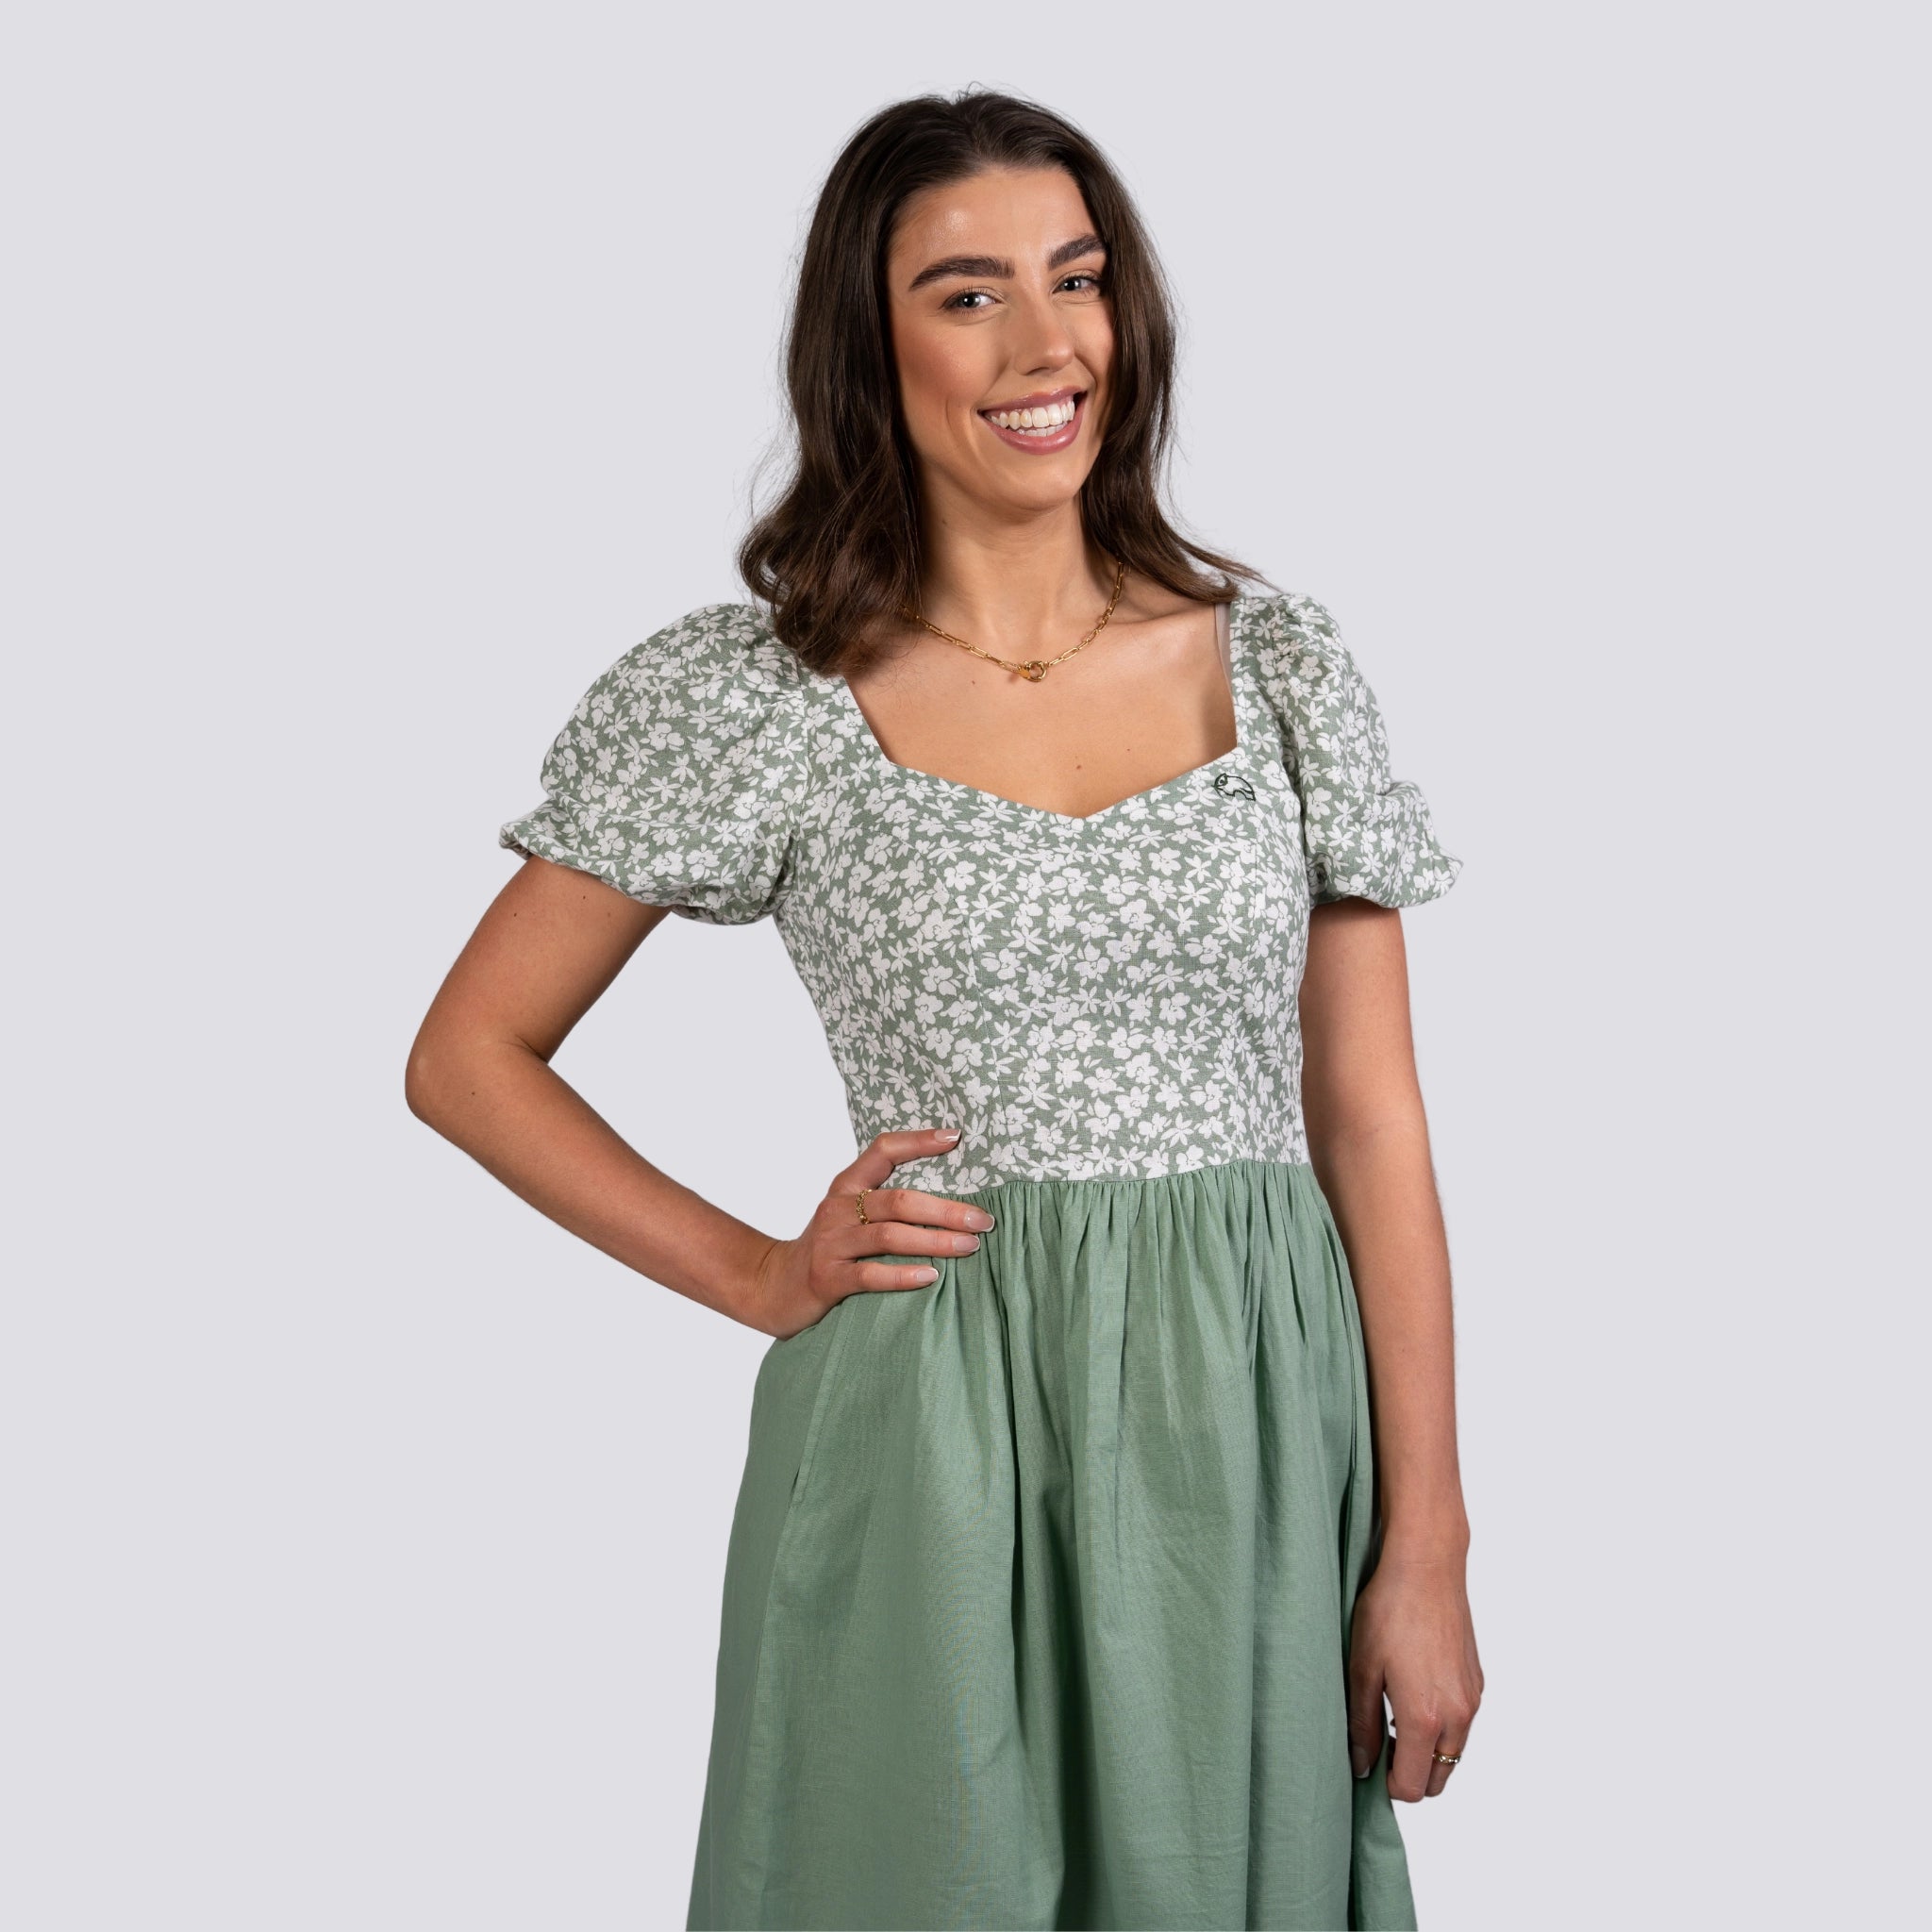 Young woman smiling, wearing a green and white Karee Frock Dress with a knee-length hemline, standing against a light gray background.